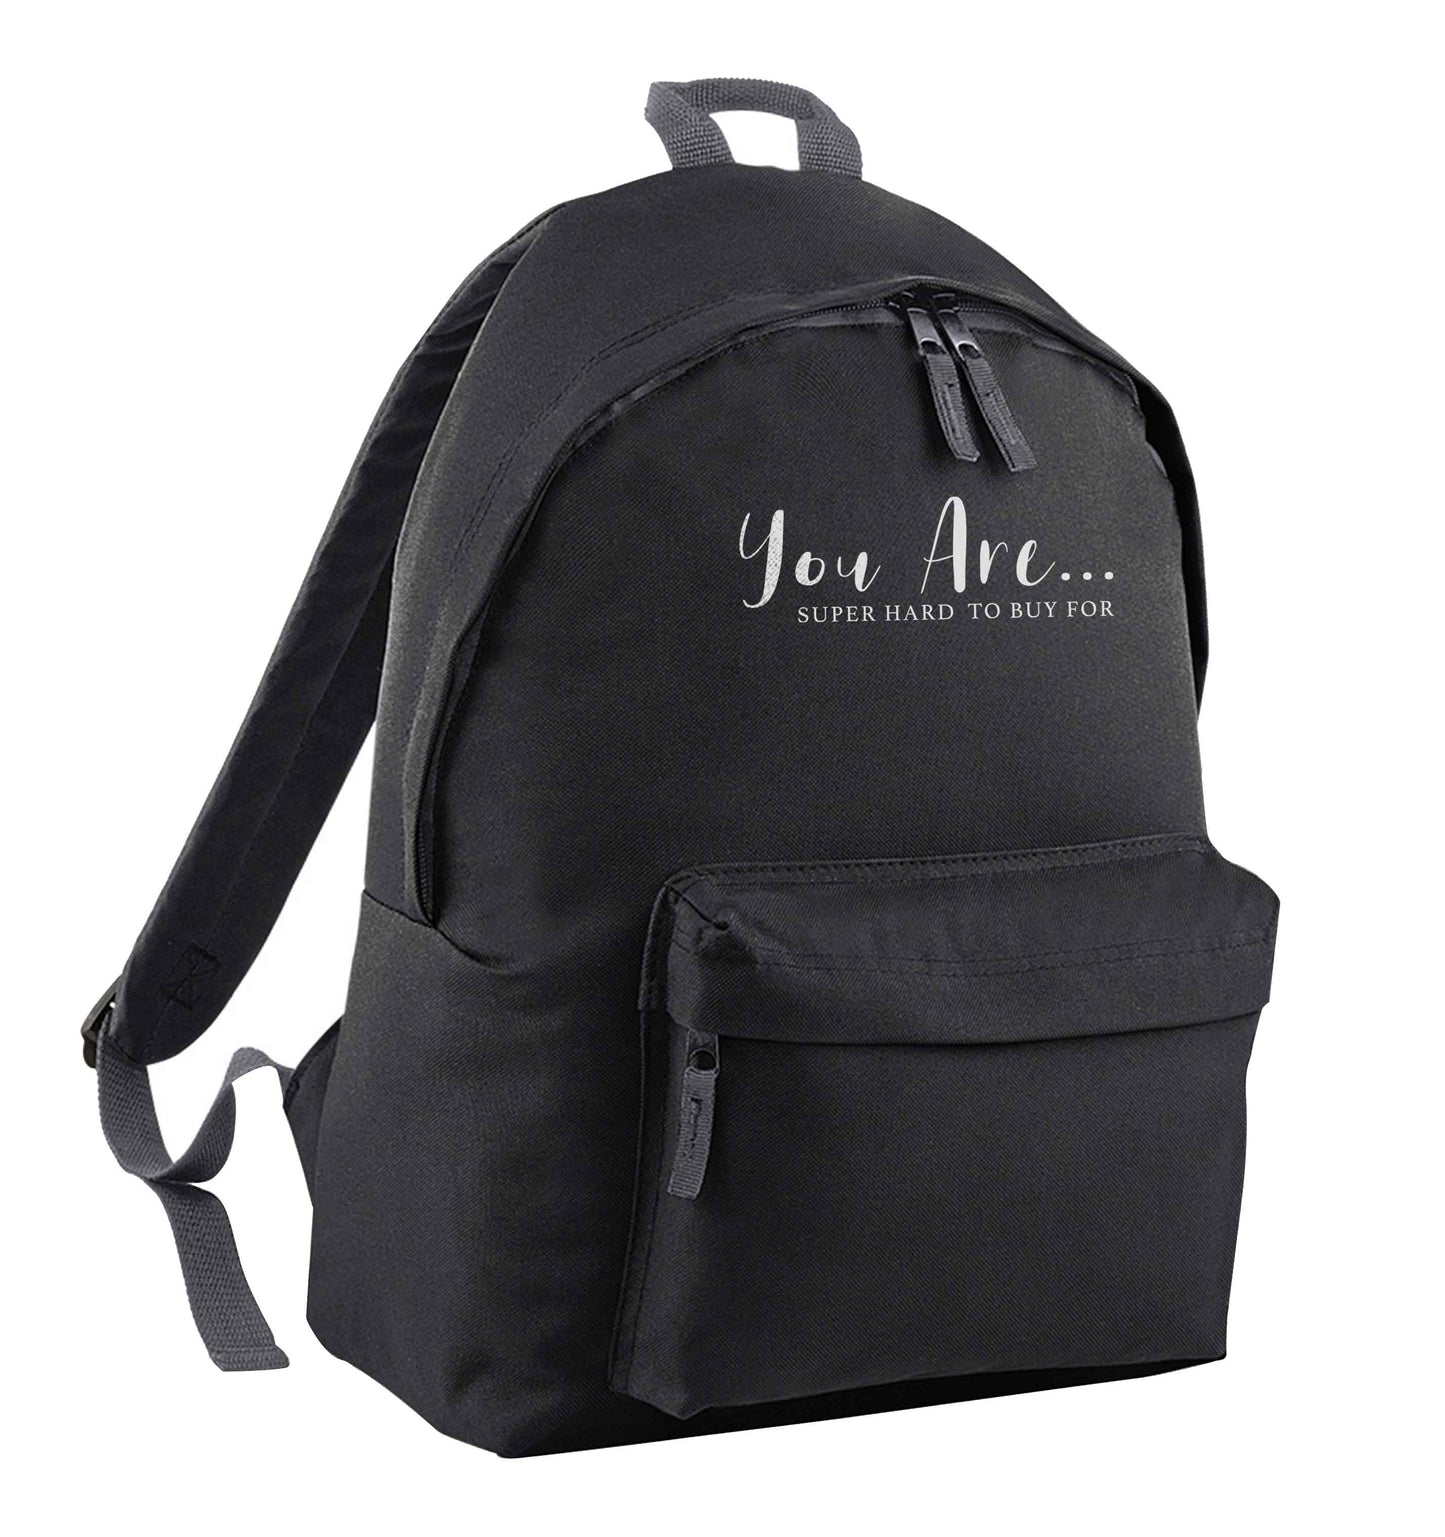 You are super hard to buy for black adults backpack